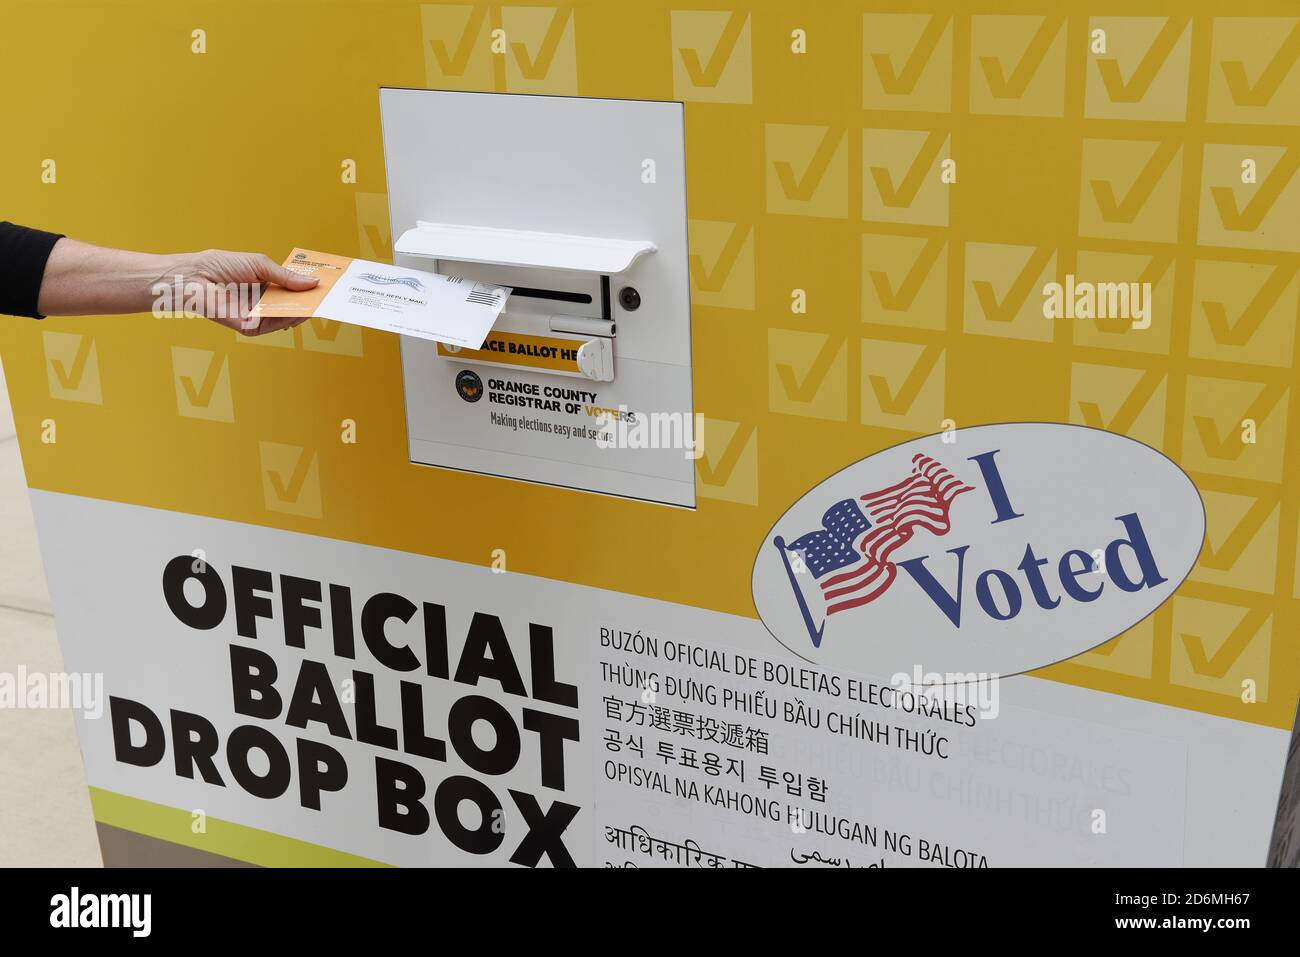 IRVINE, CALIFORNIA - 18 OCT 2020: Woman placing mail in ballot in an Official Ballot Drop Box in Orange County, California. Stock Photo